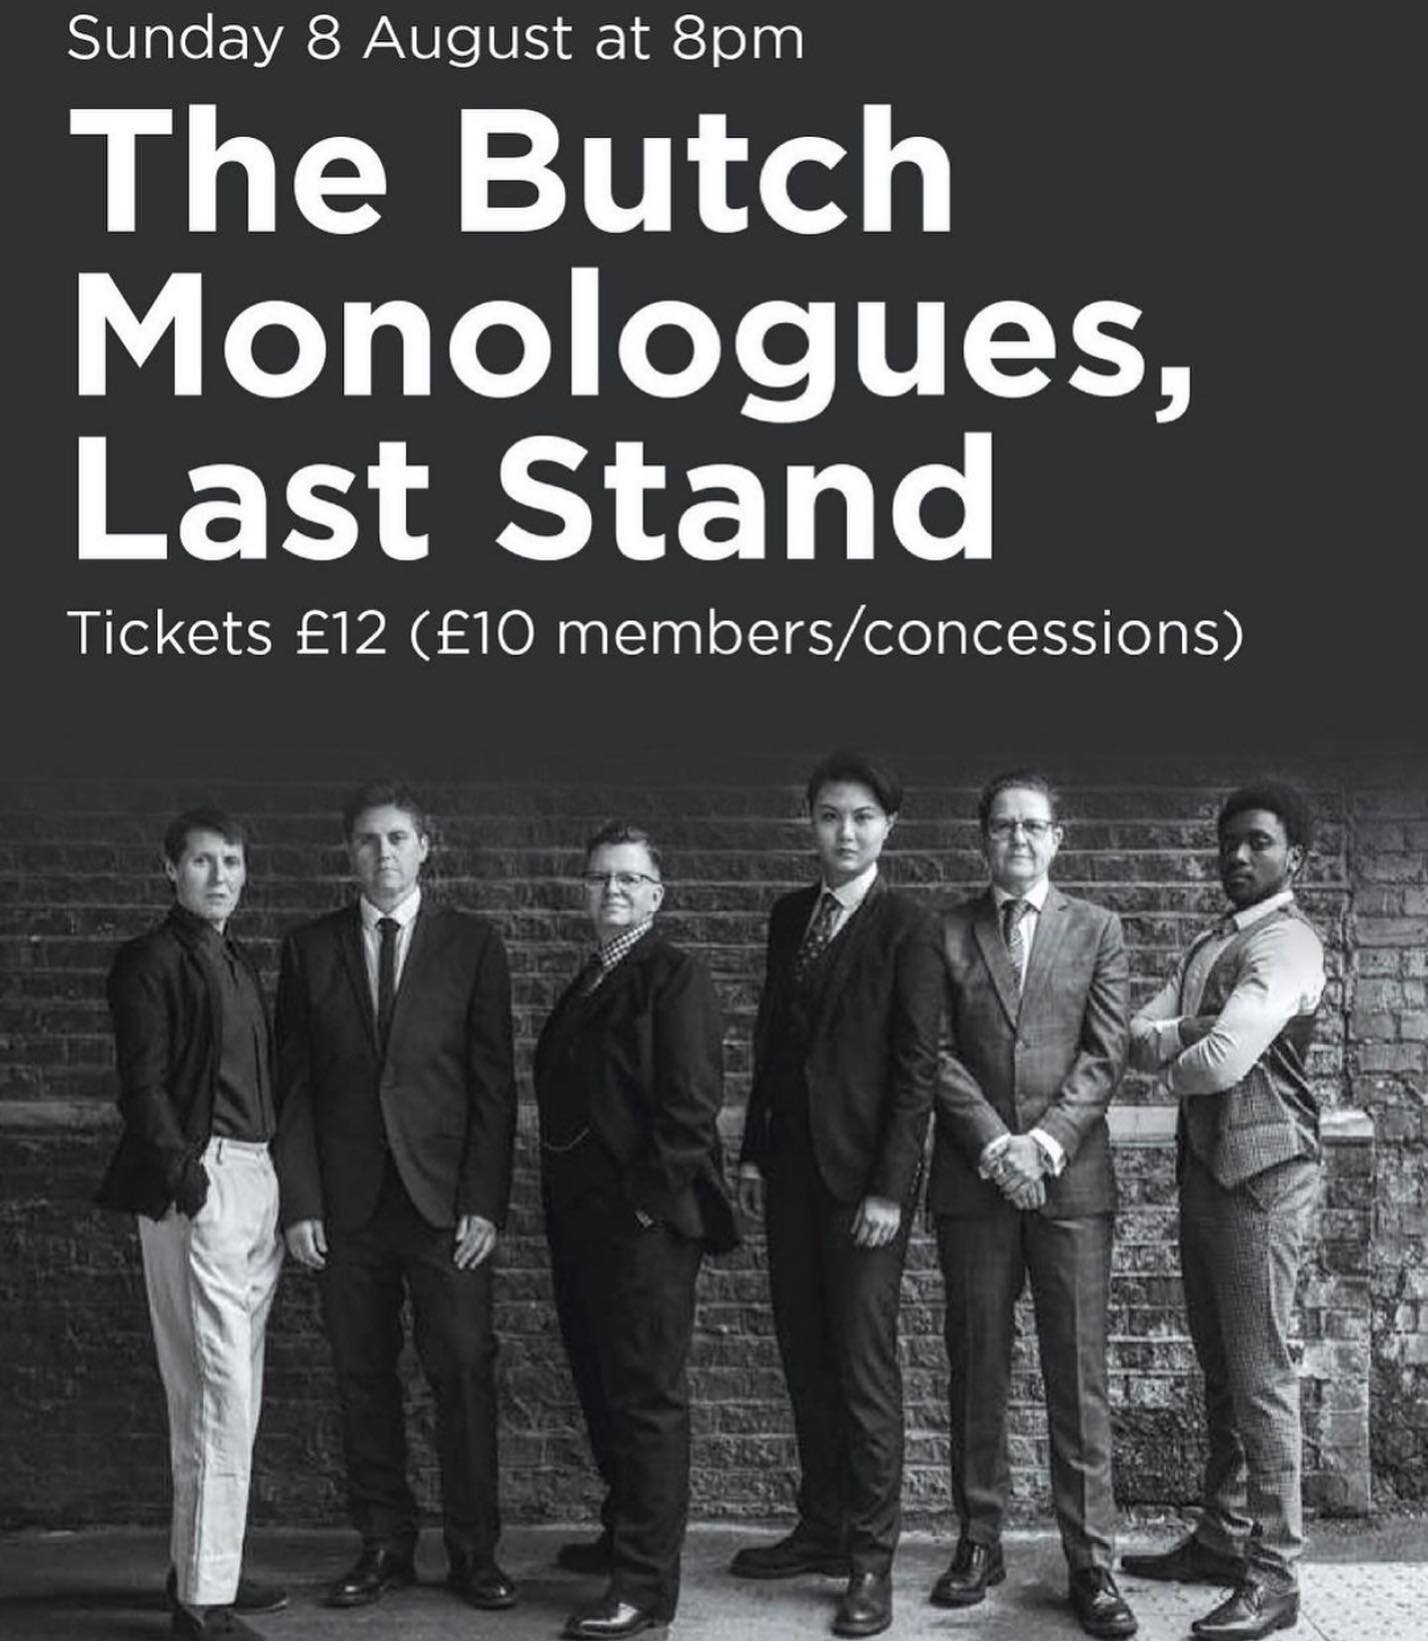 Our first gig is up for booking via @stablestheatre. Details in @thebutchmonologues bio. Please join us in the flesh or see us online at later dates to be released in August. 📸 @christaholkastudio #thebutchmonologues #lgbtqia #butch #nonbinary #tran